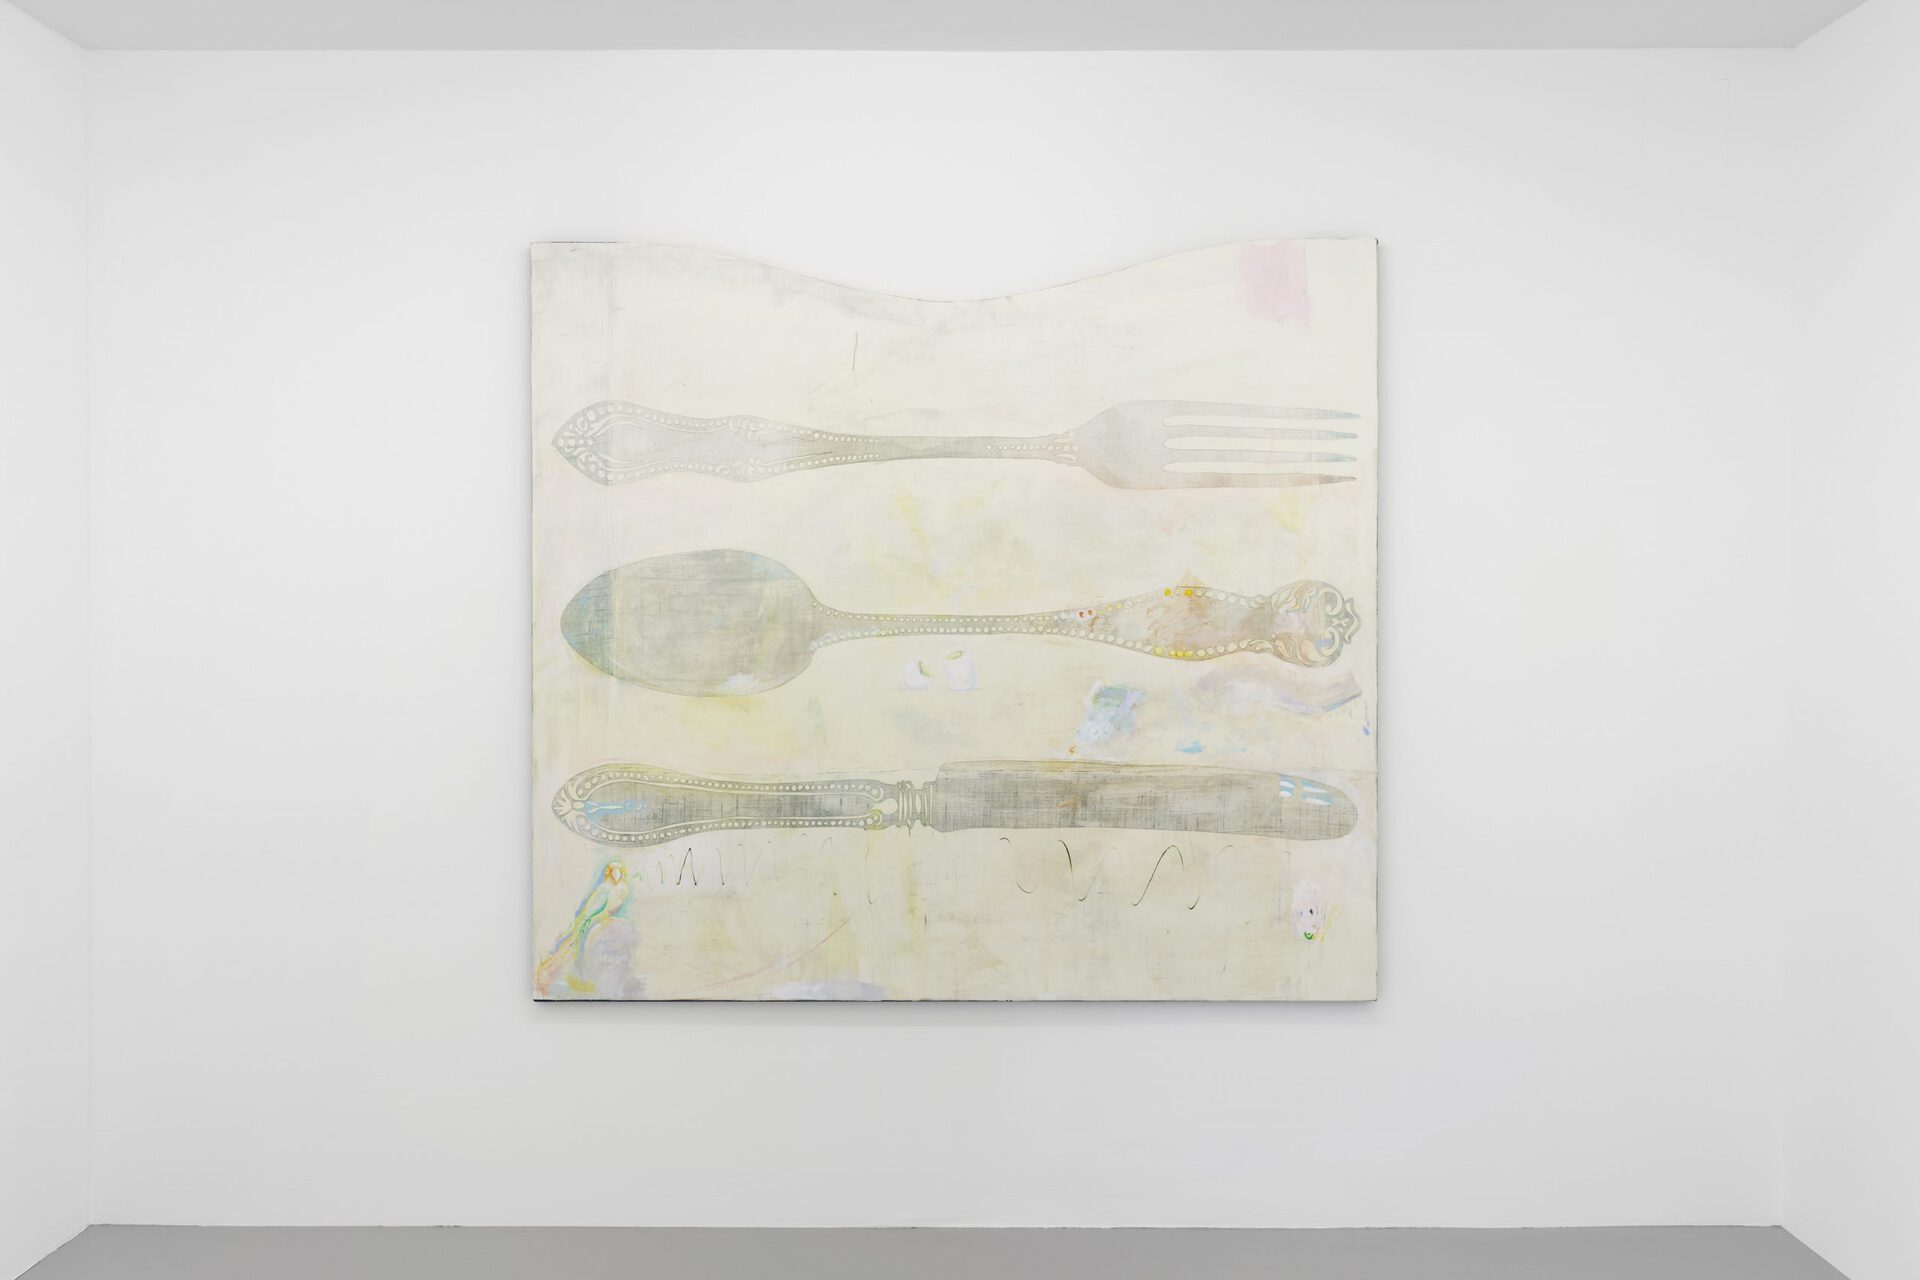 Sophie Reinhold, Wer will schon dreckiges Silber erben (Who wants to inherit dirty silver), 2020, oil on marble powder on jute, 180 x 200 cm